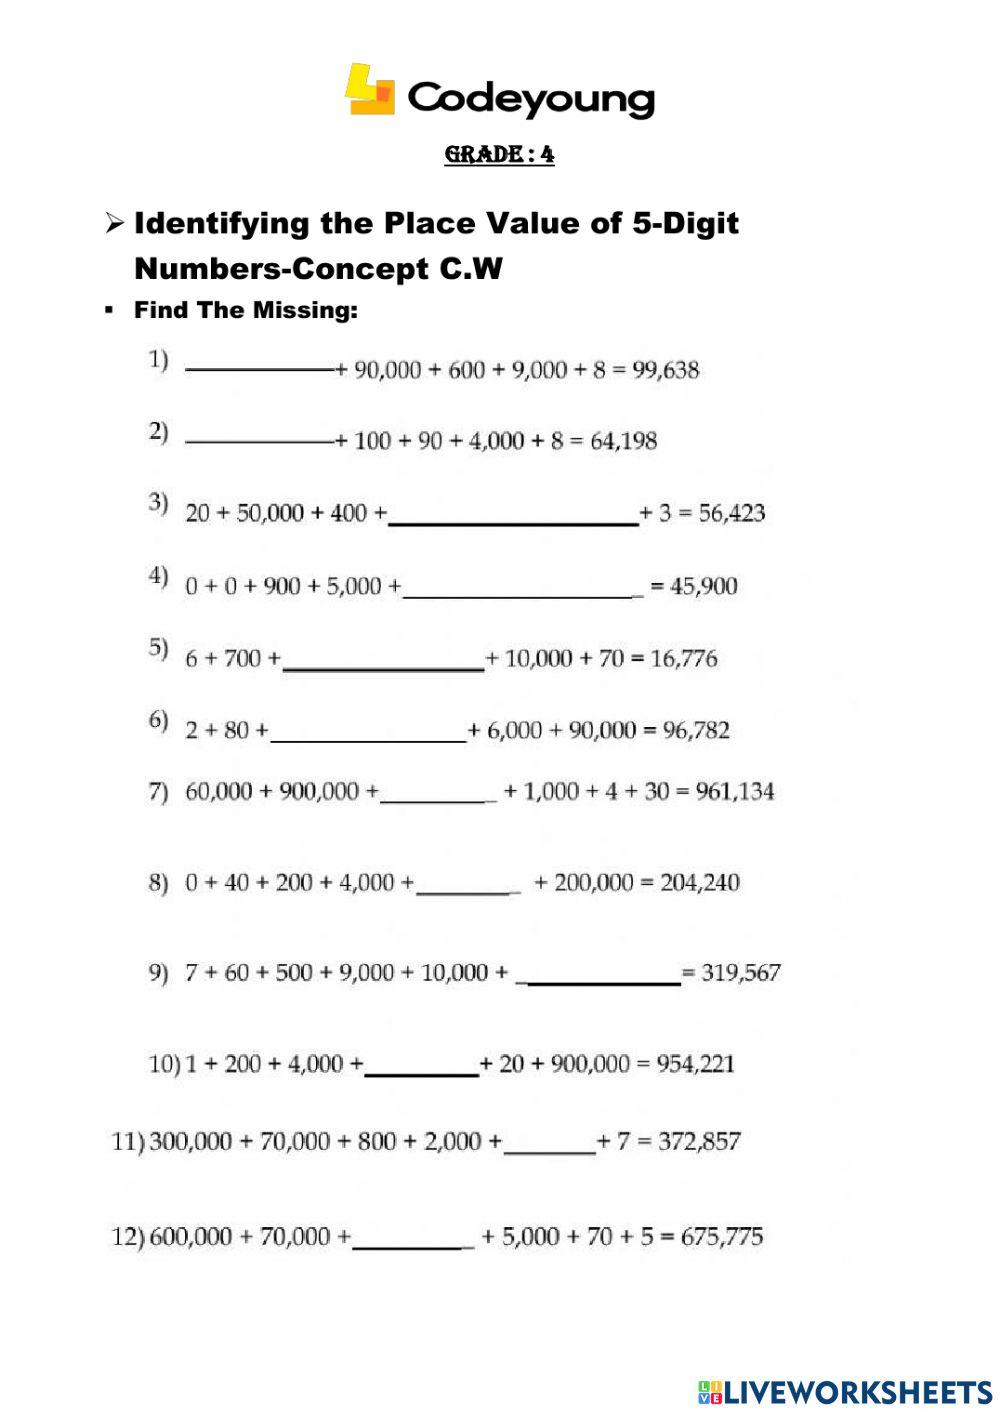 	Identifying the Place Value of 5-Digit Numbers-Concept C.W